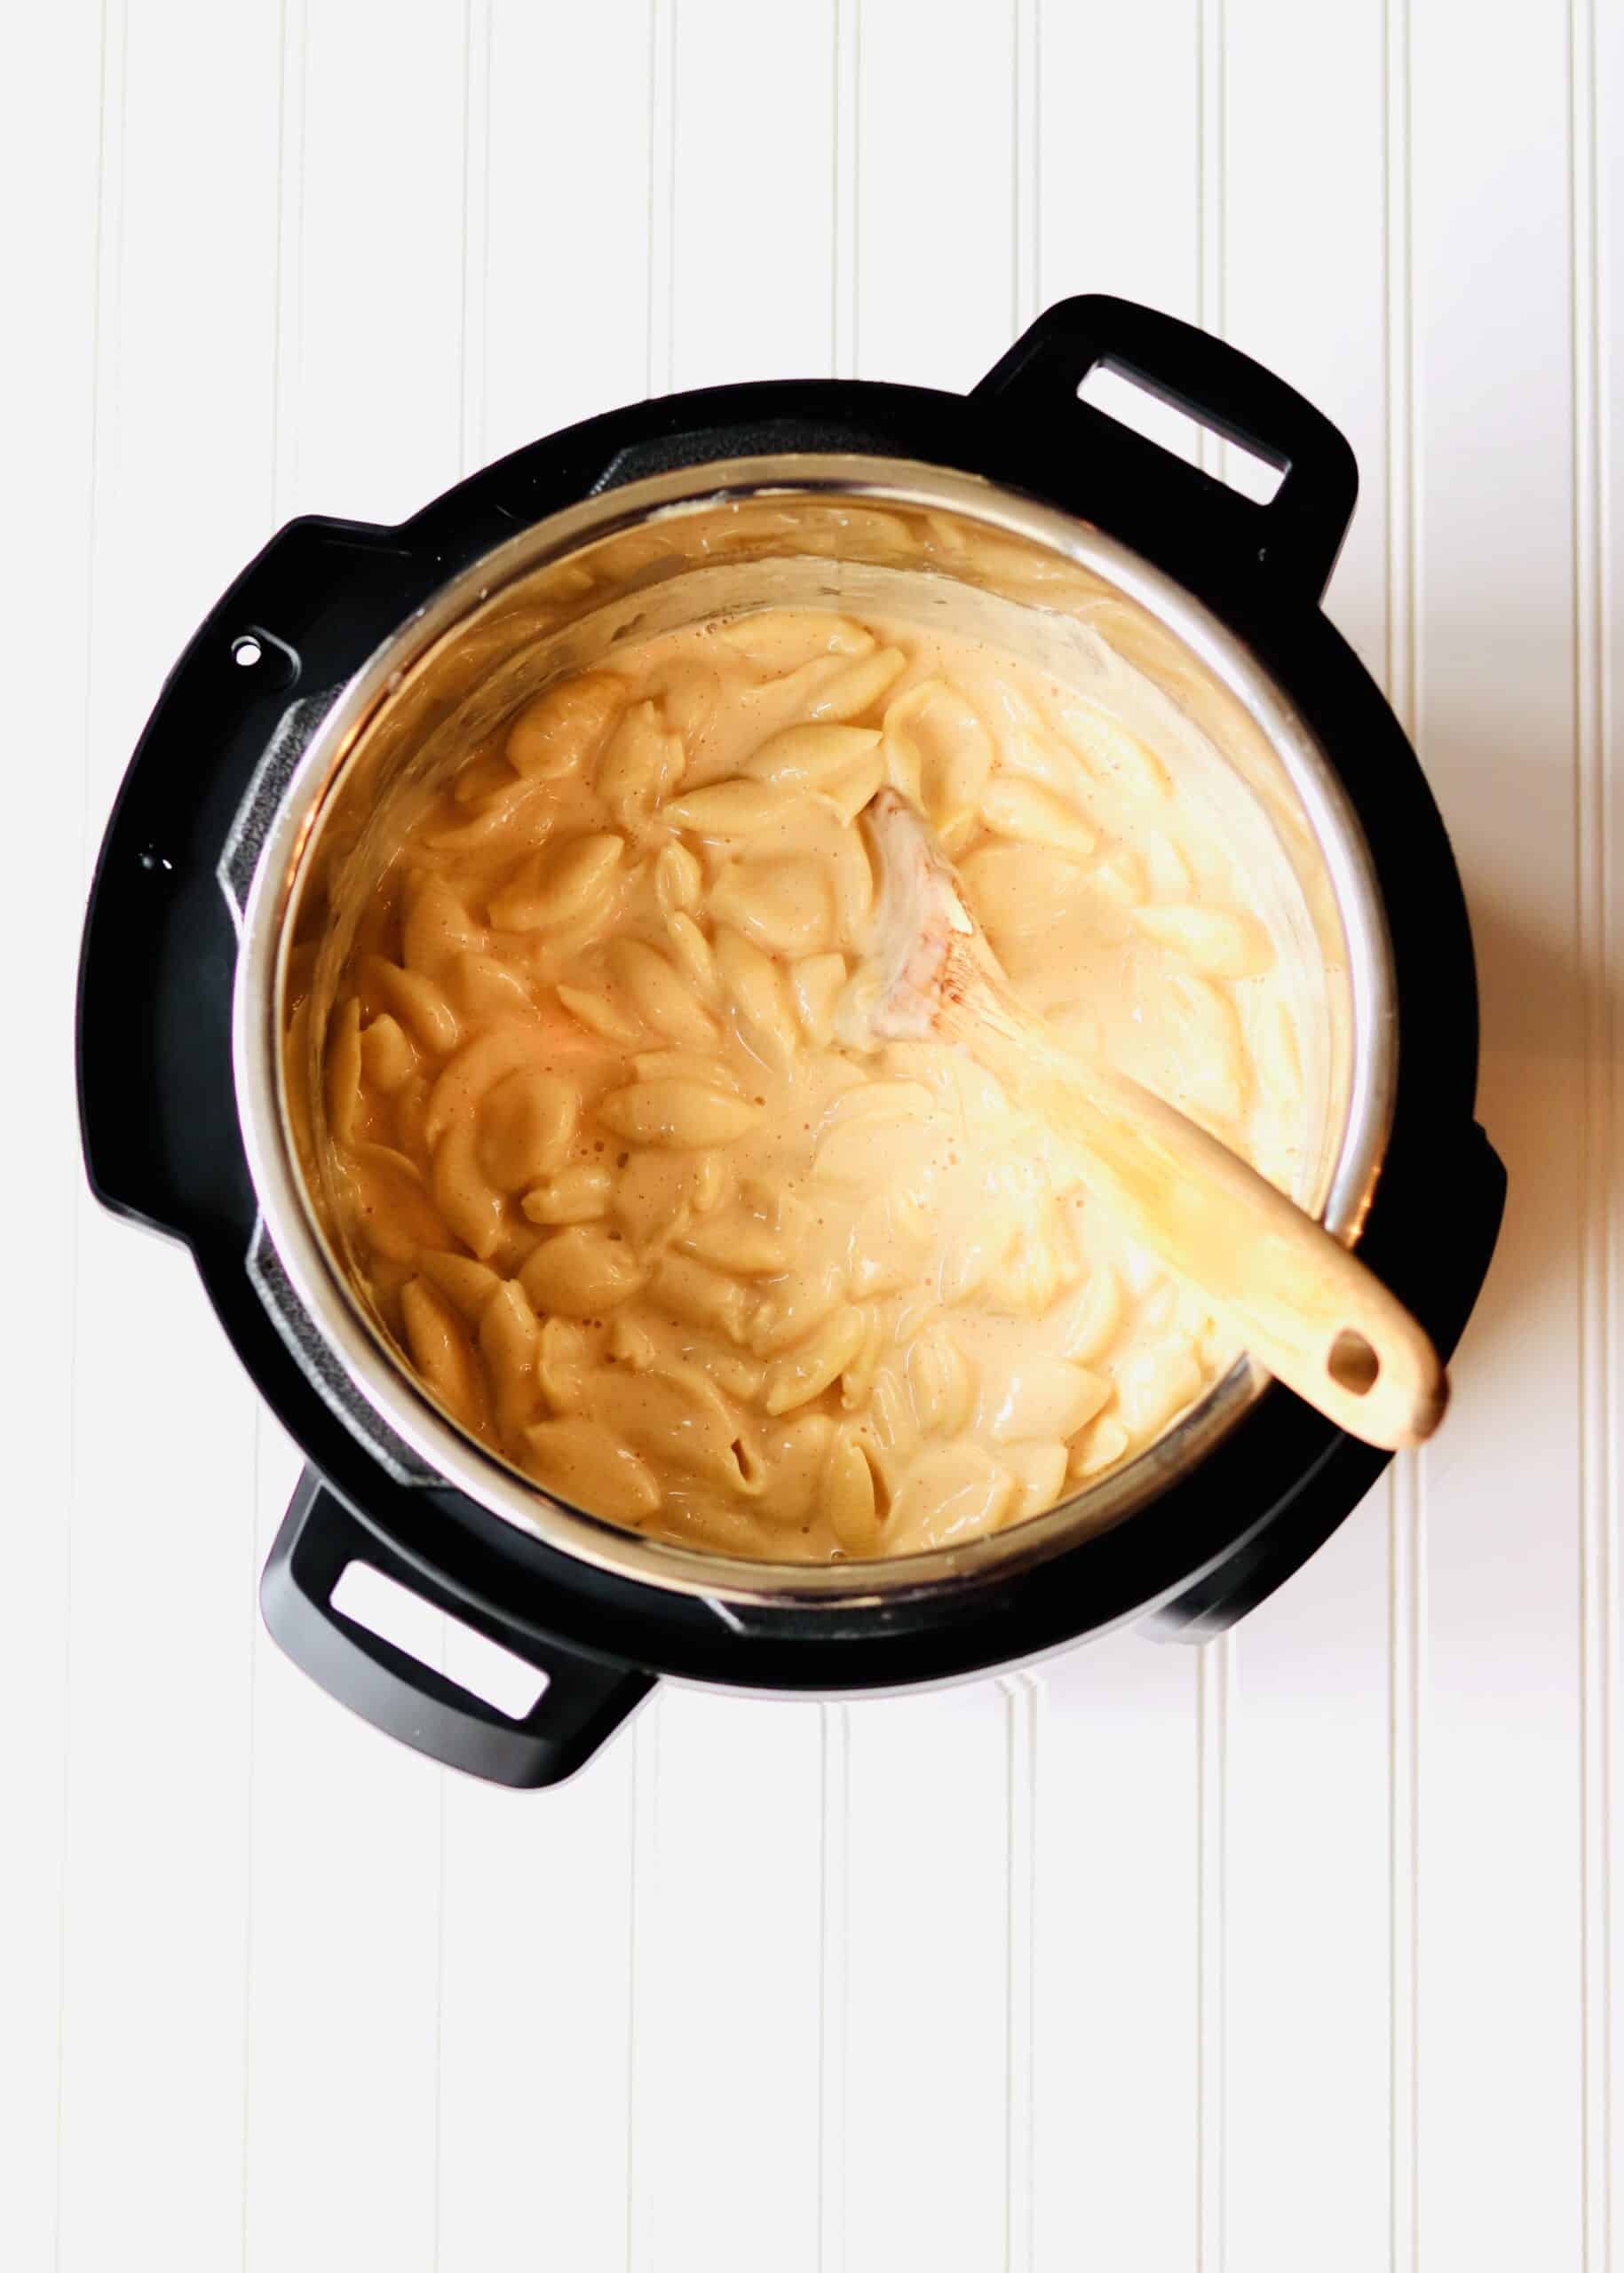 Instant Pot Mac and Cheese is the perfect comfort food. Uses just 4 ingredients (plus a few basic spices) and comes together in less than 30 minutes. Using evaporated milk makes this pasta extra rich and creamy. Recipe at KathleensCravings.com